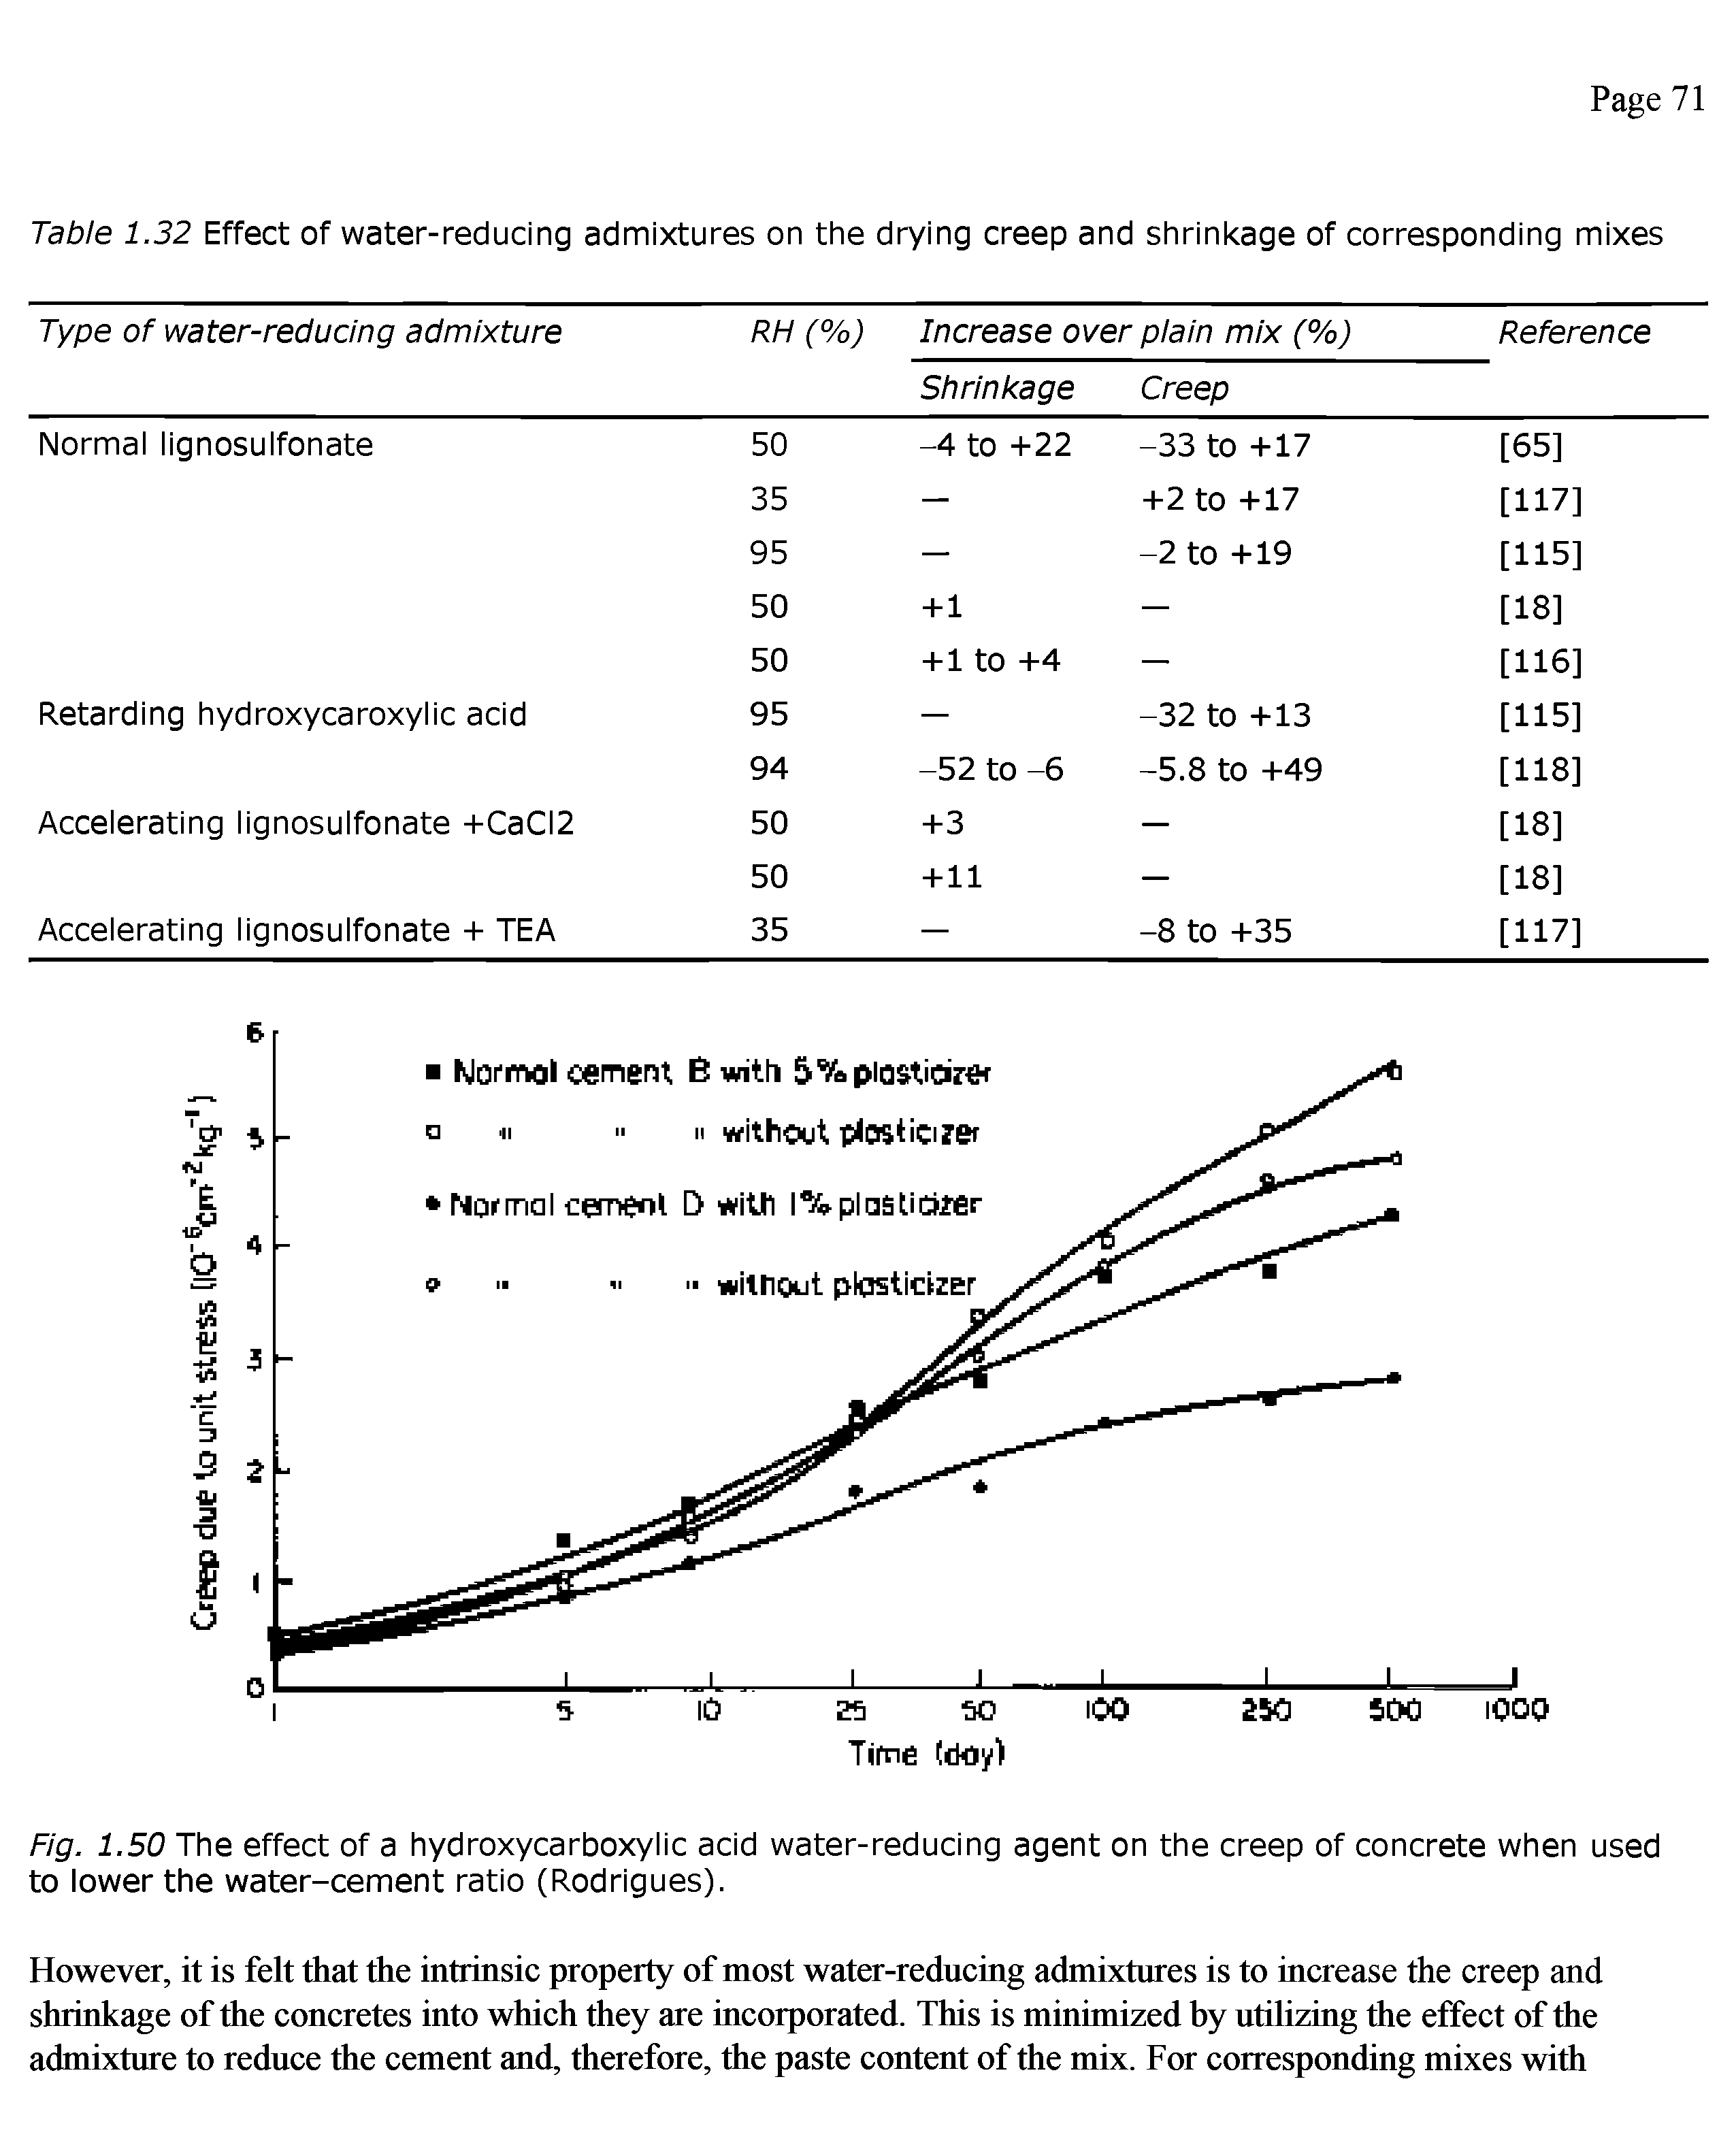 Fig. 1.50 The effect of a hydroxycarboxyiic acid water-reducing agent on the creep of concrete when used to lower the water-cement ratio (Rodrigues).